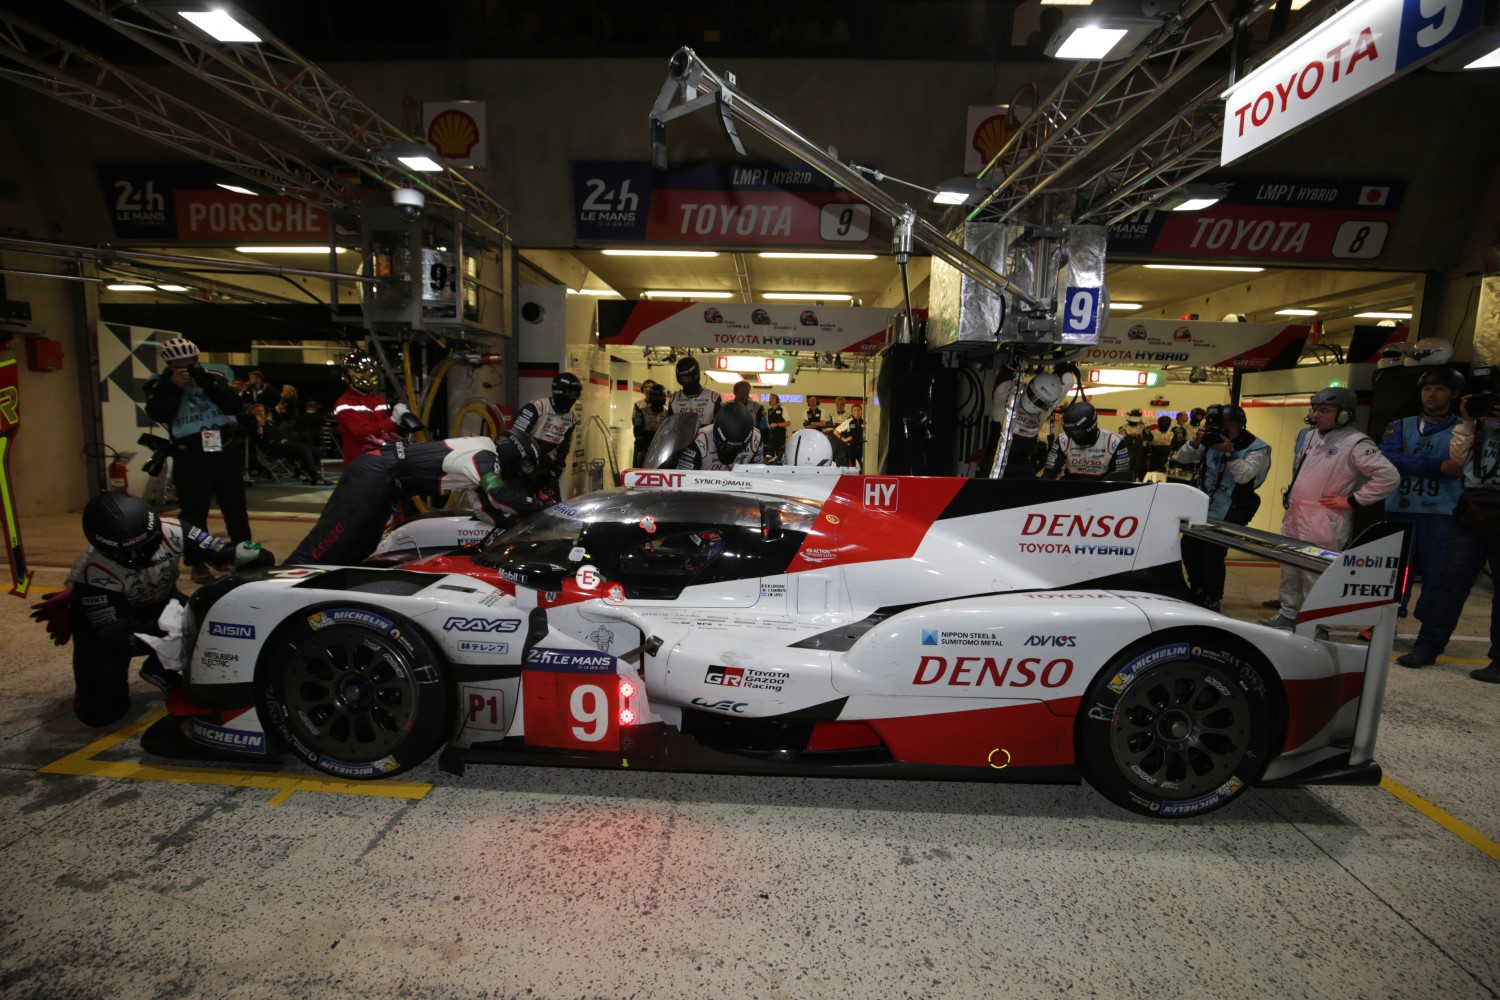 All the LMP1 cars either fell out or were in for repairs for over 1-hour